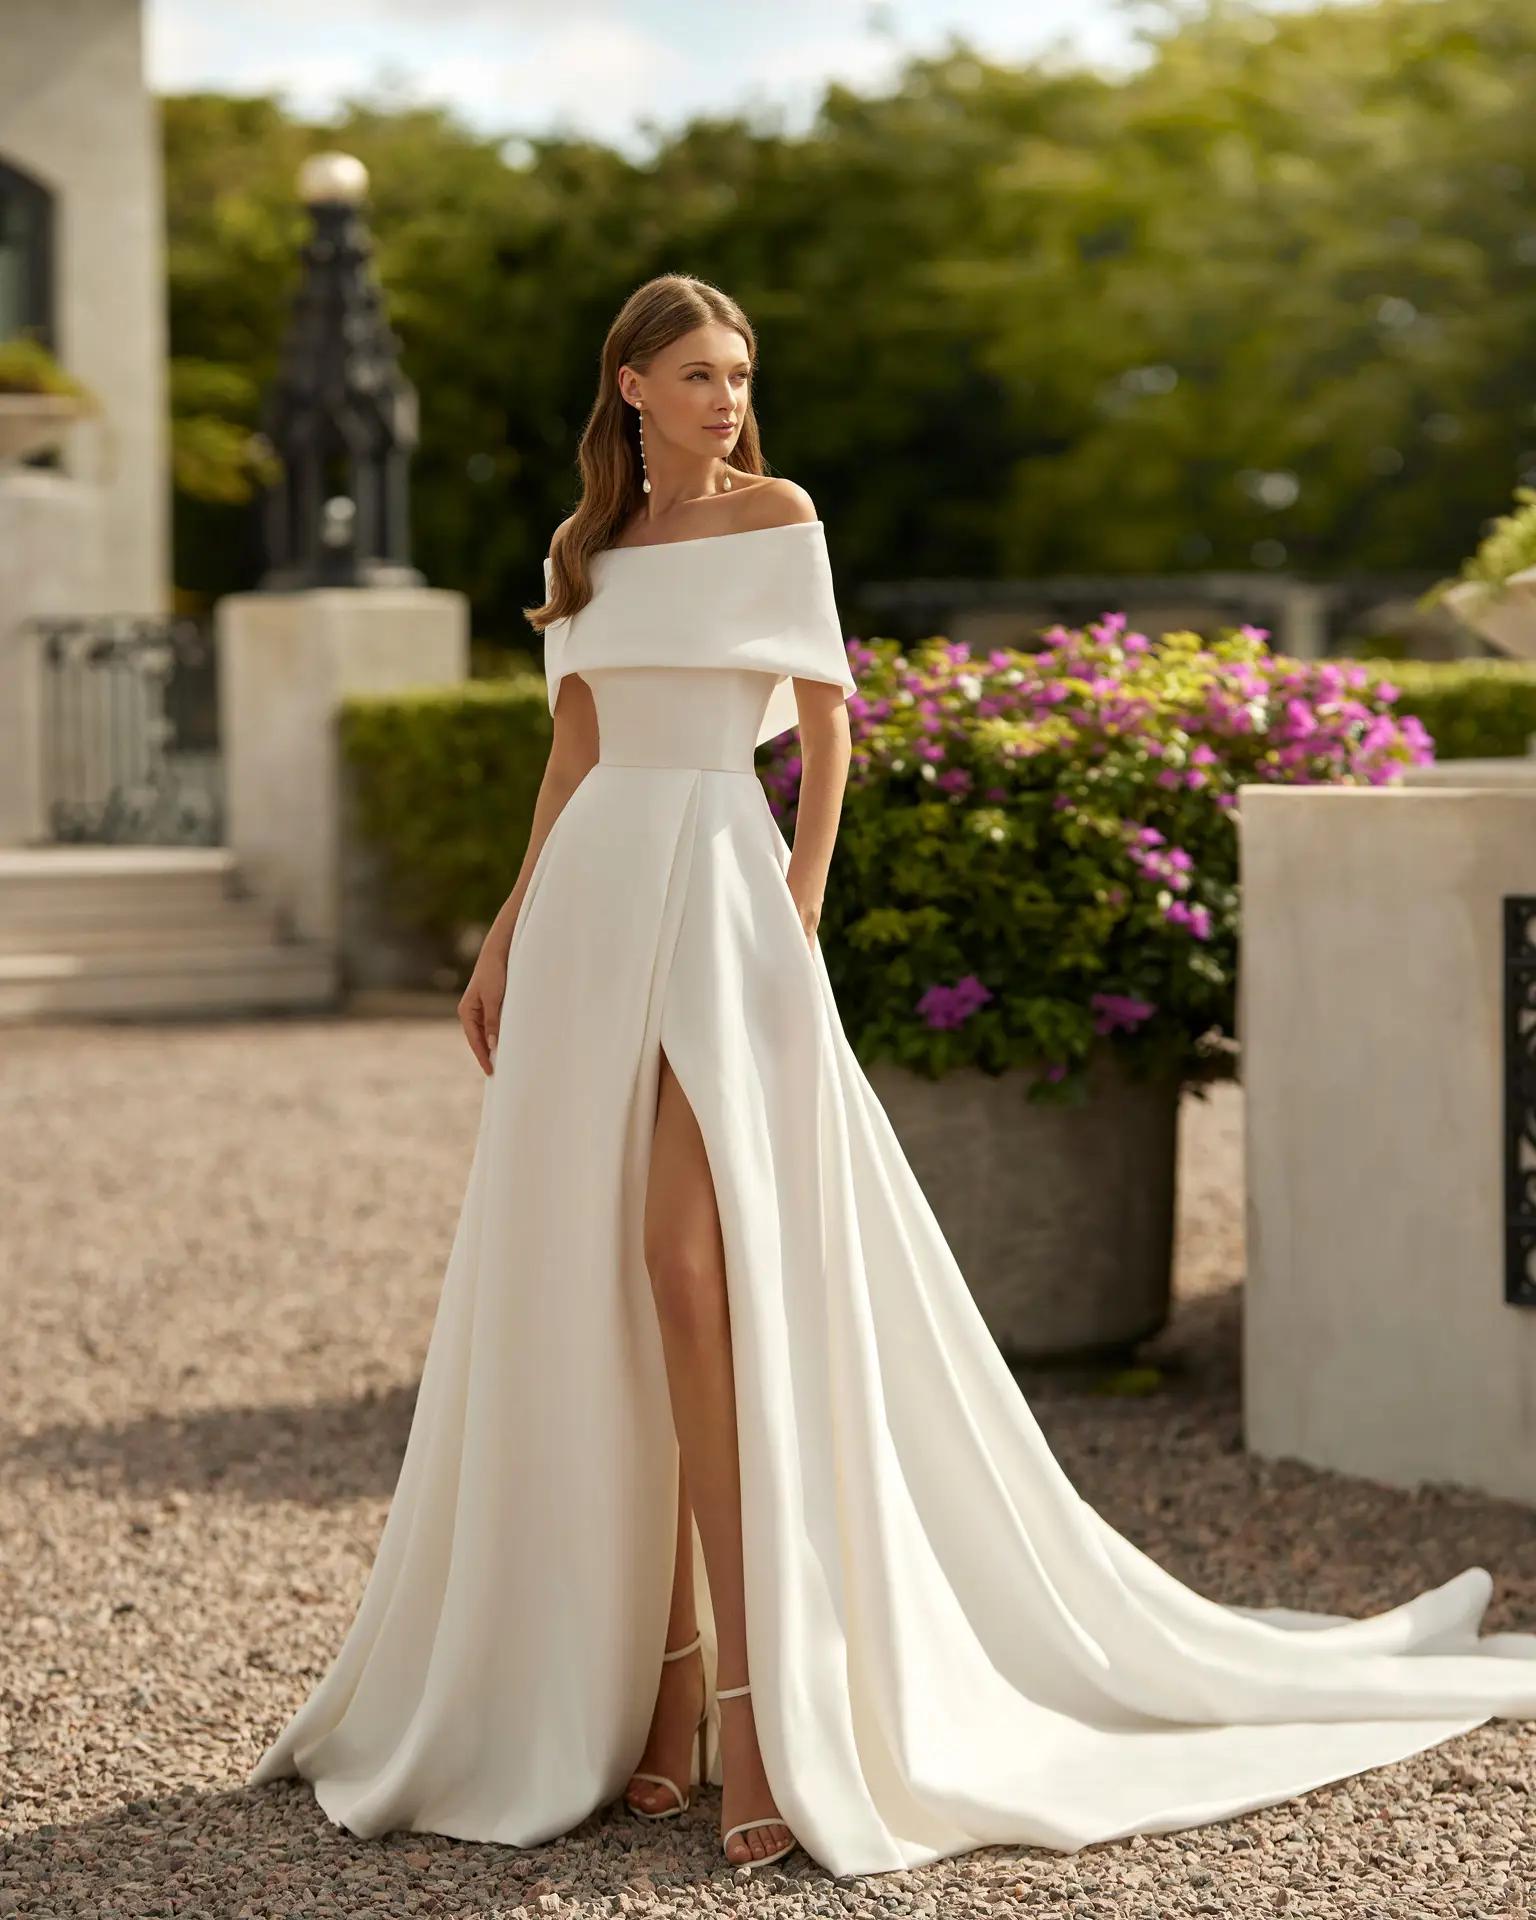 Euron ballgown wedding dress by Rosa Clara with slit and removable topper for dual bridal looks